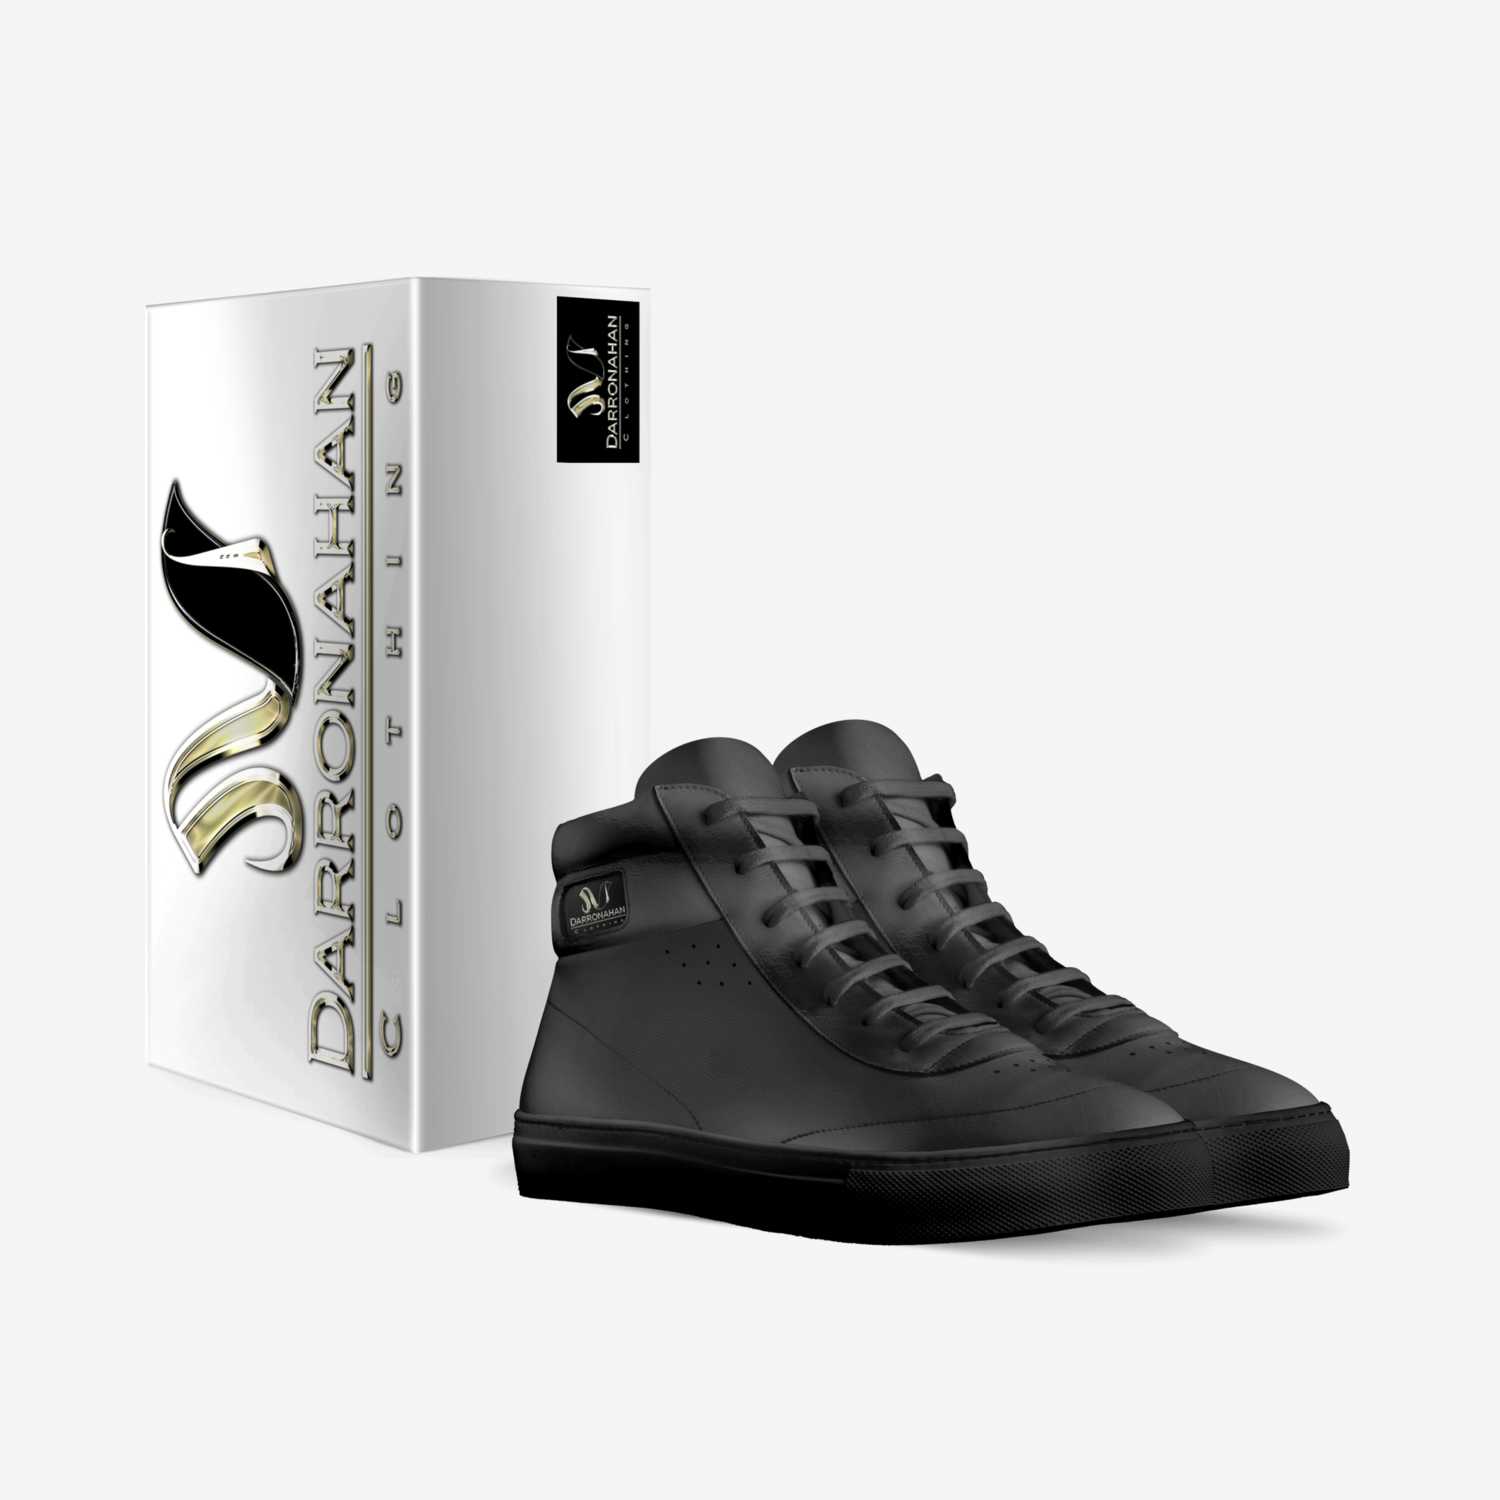 DARRONAHAN BLAKOUT custom made in Italy shoes by Kendas Mcclanahan | Box view